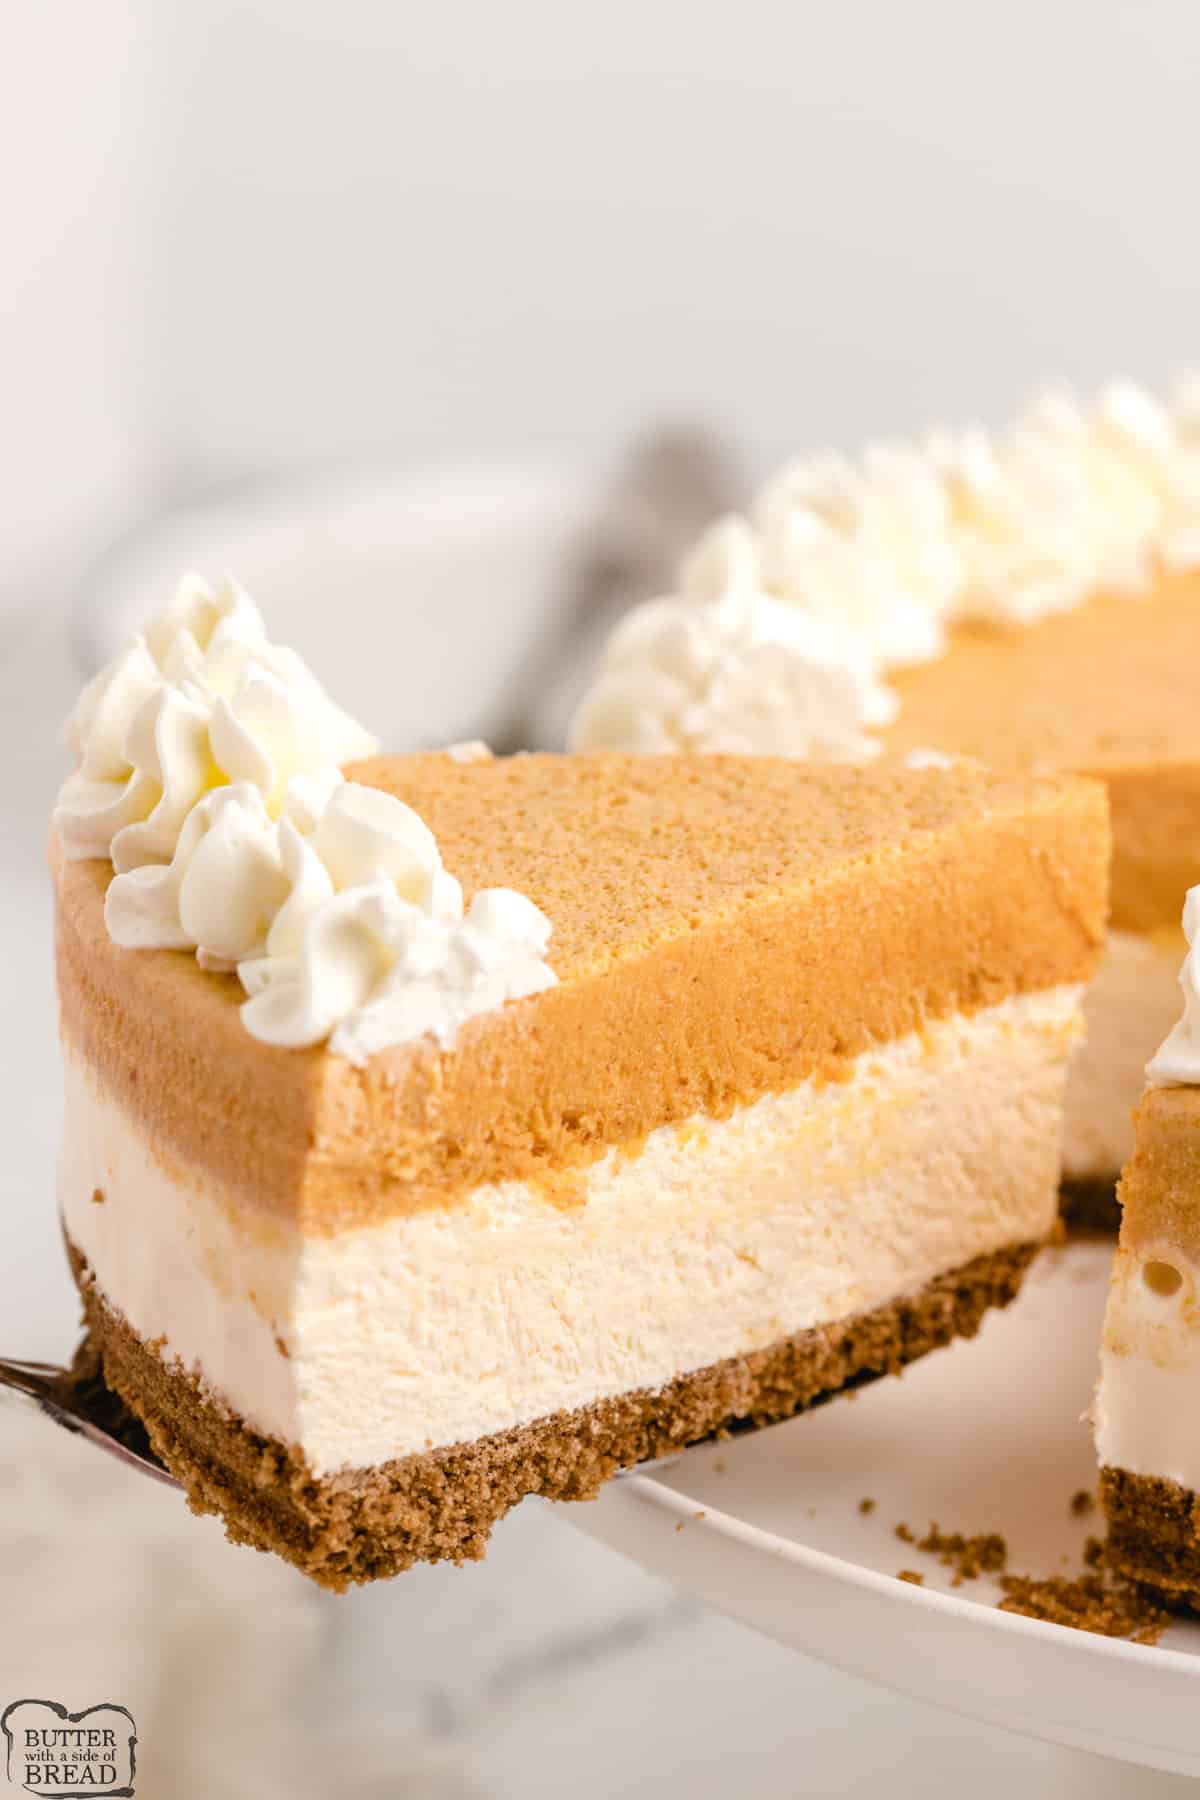 Layered Pumpkin Ice Cream Dessert is made with a gingersnap cookie crust with layers of pumpkin and vanilla ice cream. This delicious no bake pumpkin pie is absolutely perfect for the fall season!